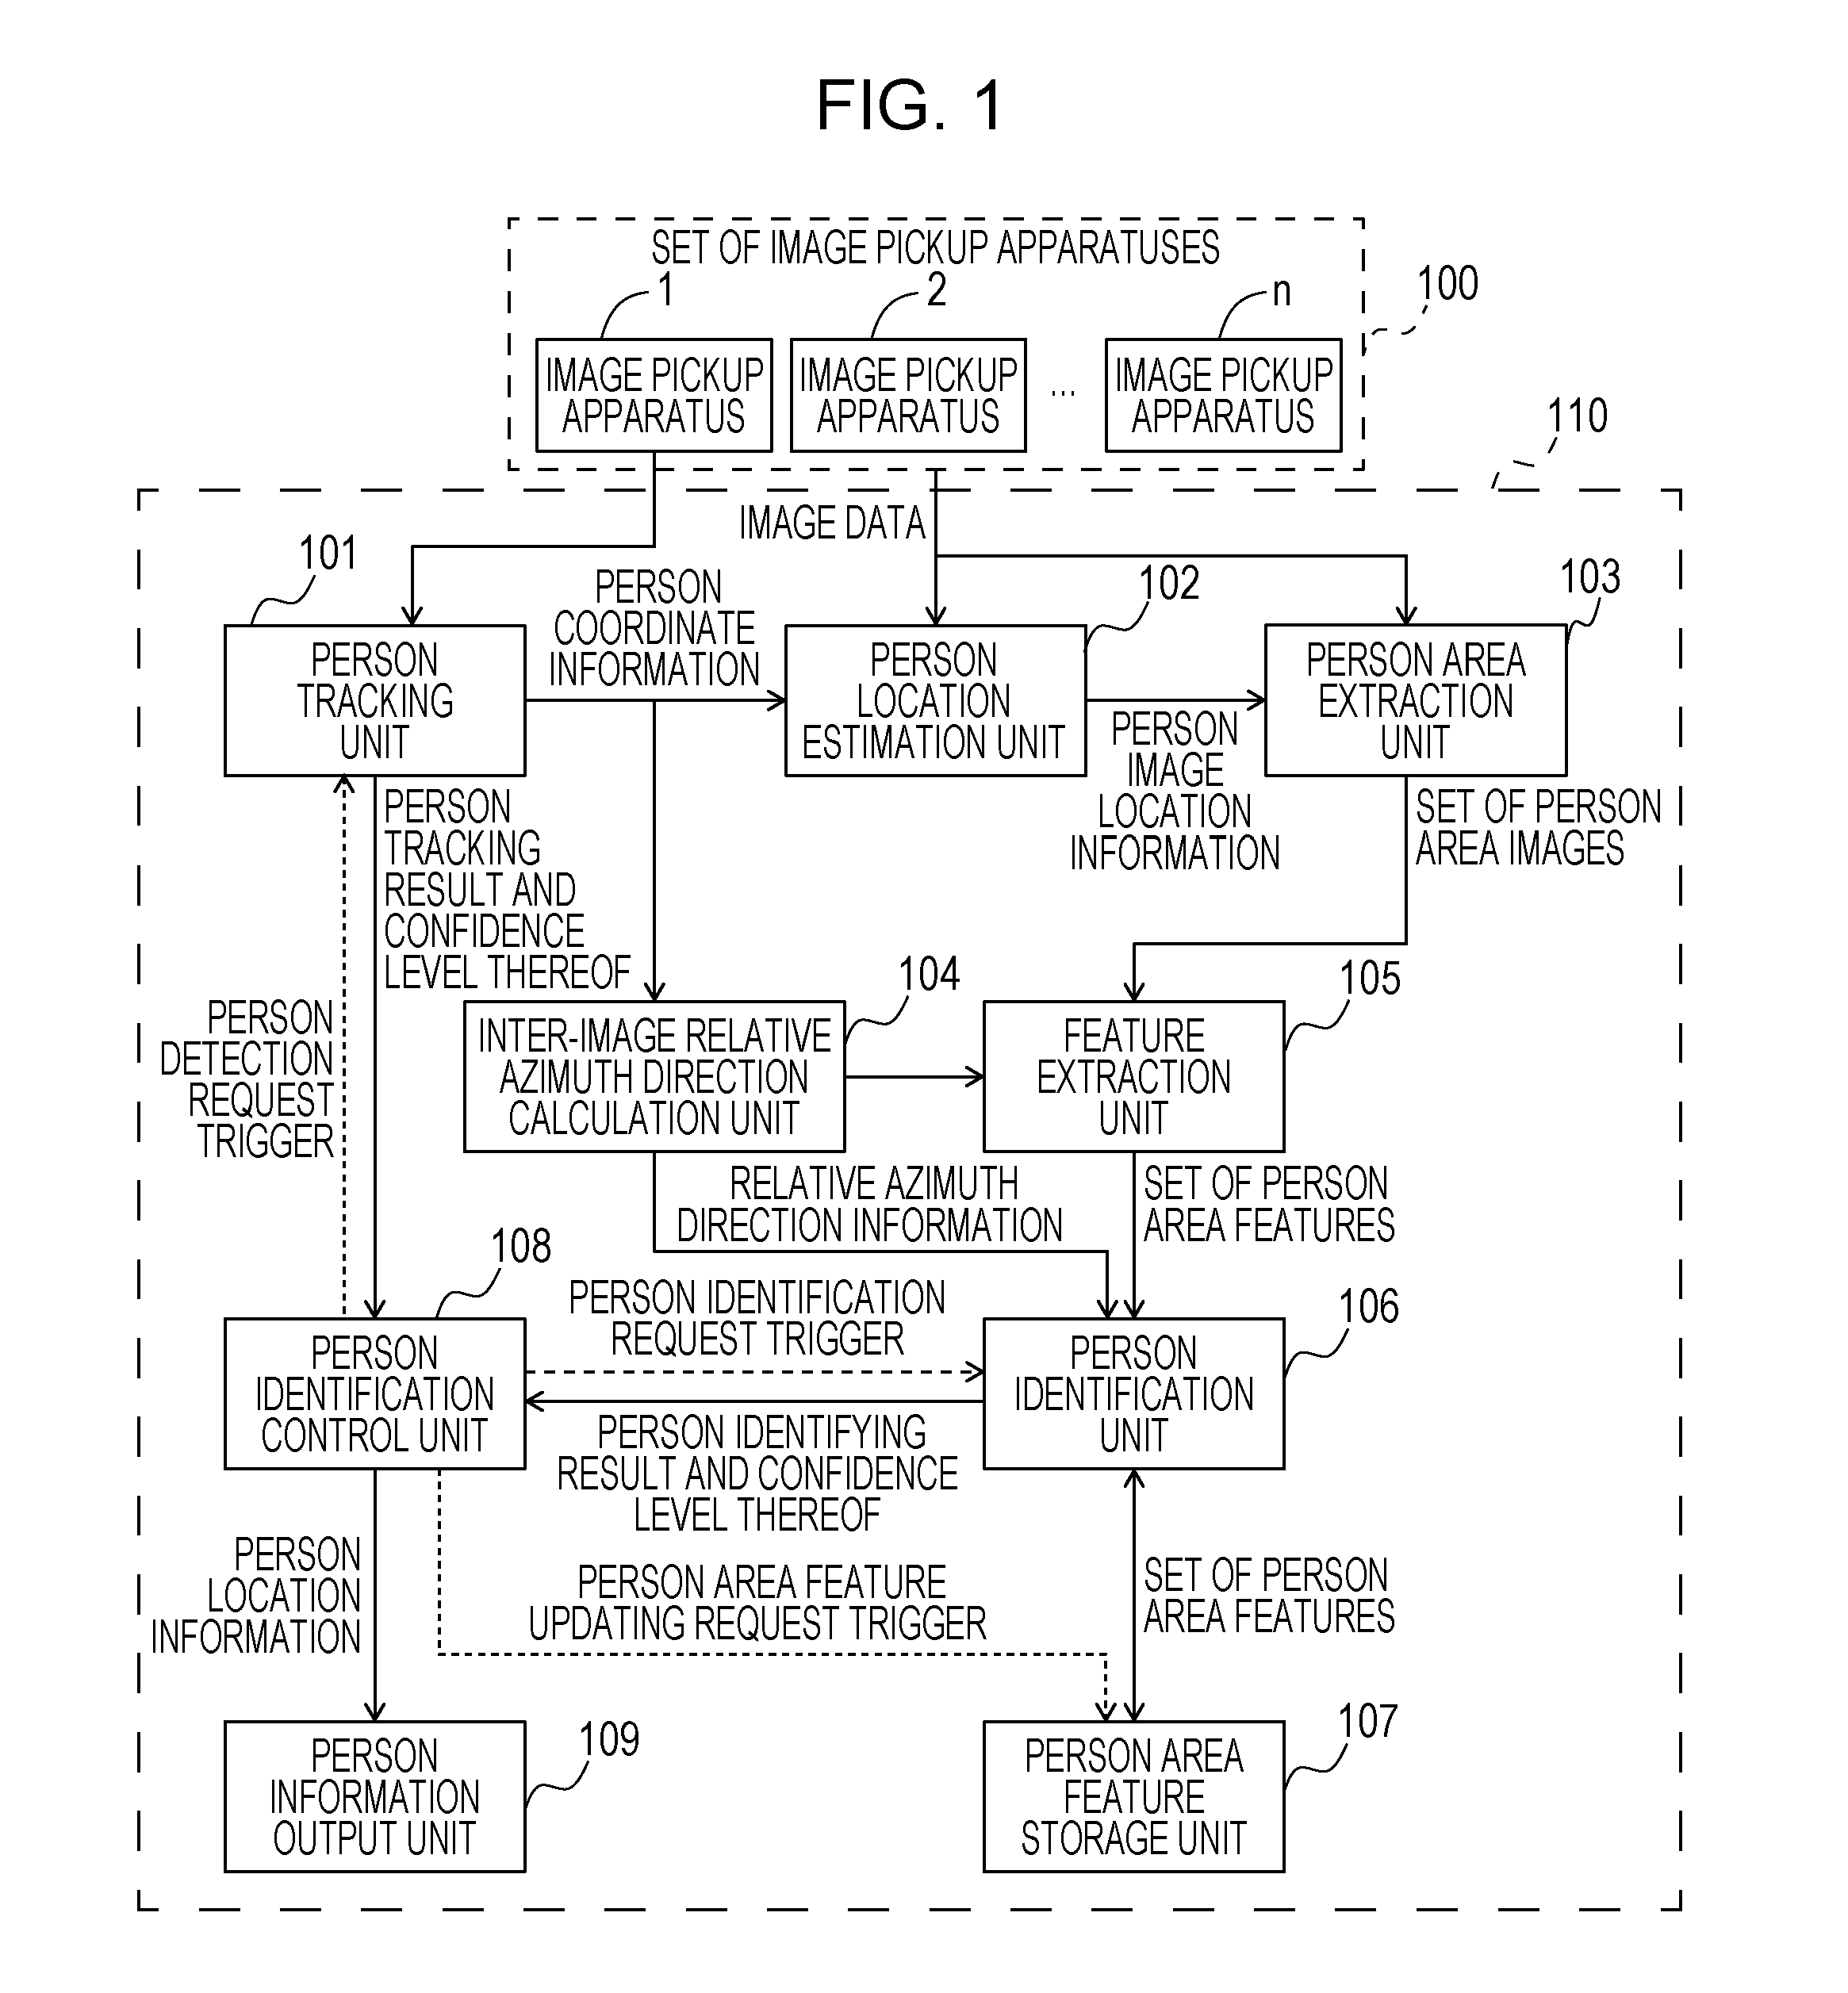 Image recognition system, image recognition apparatus, image recognition method, and computer program